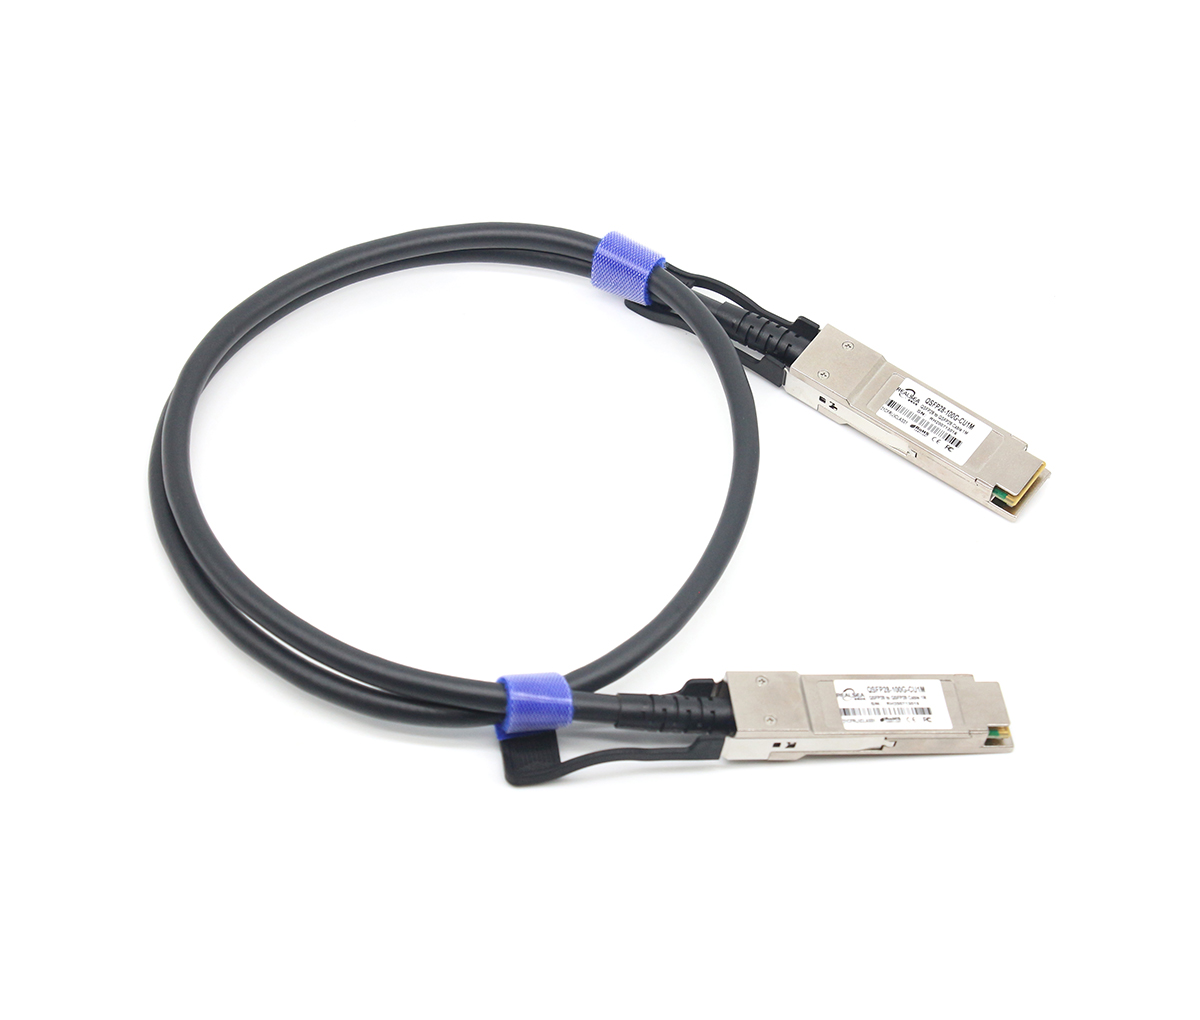 400Gb/s technology brings innovation to the SFP optical module market